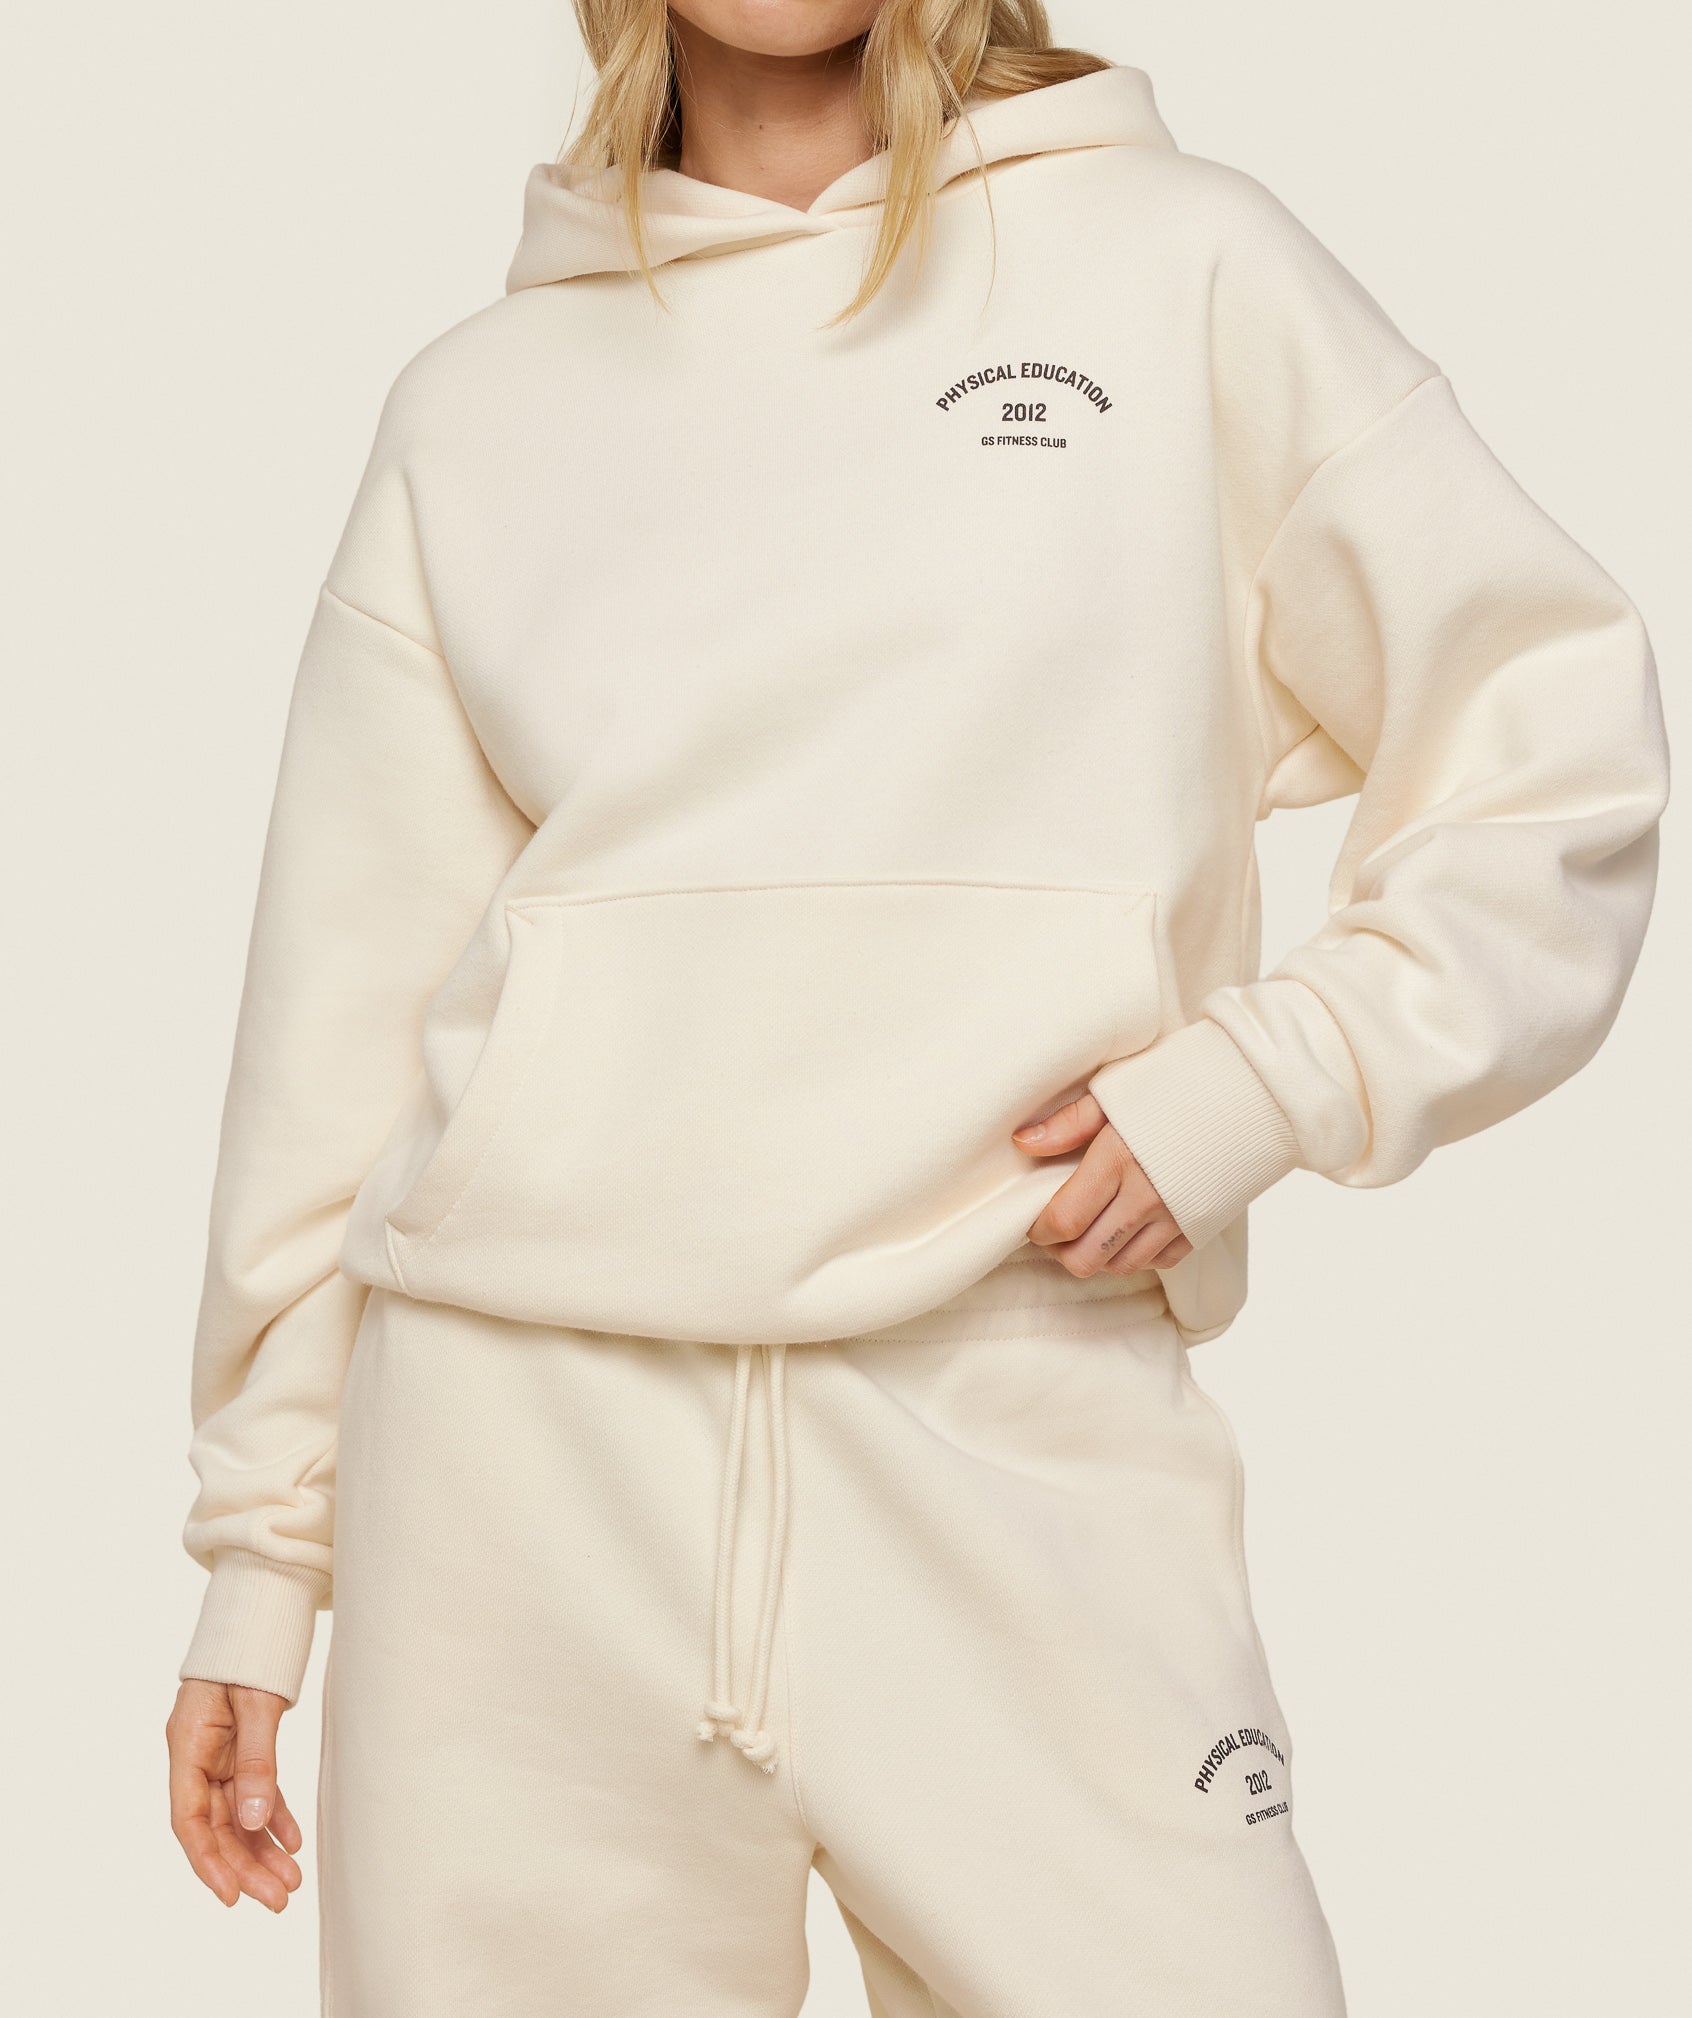 Phys Ed Graphic Hoodie in Ecru White/Archive Brown - view 3